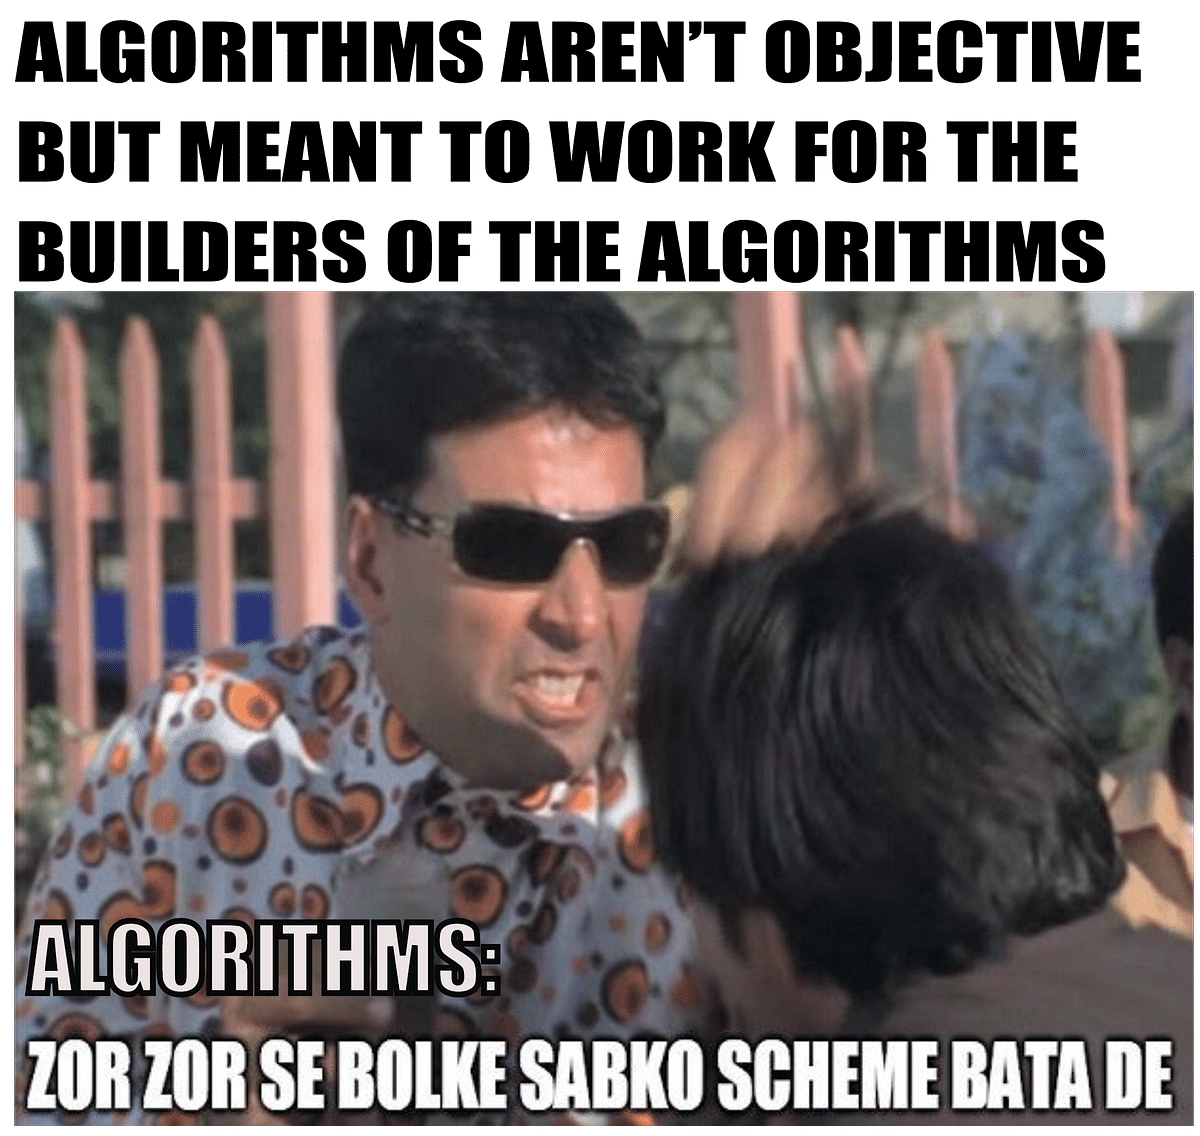 To build an algorithm we needs two things: Historical data and a definition of success. That’s where the bias lies. 